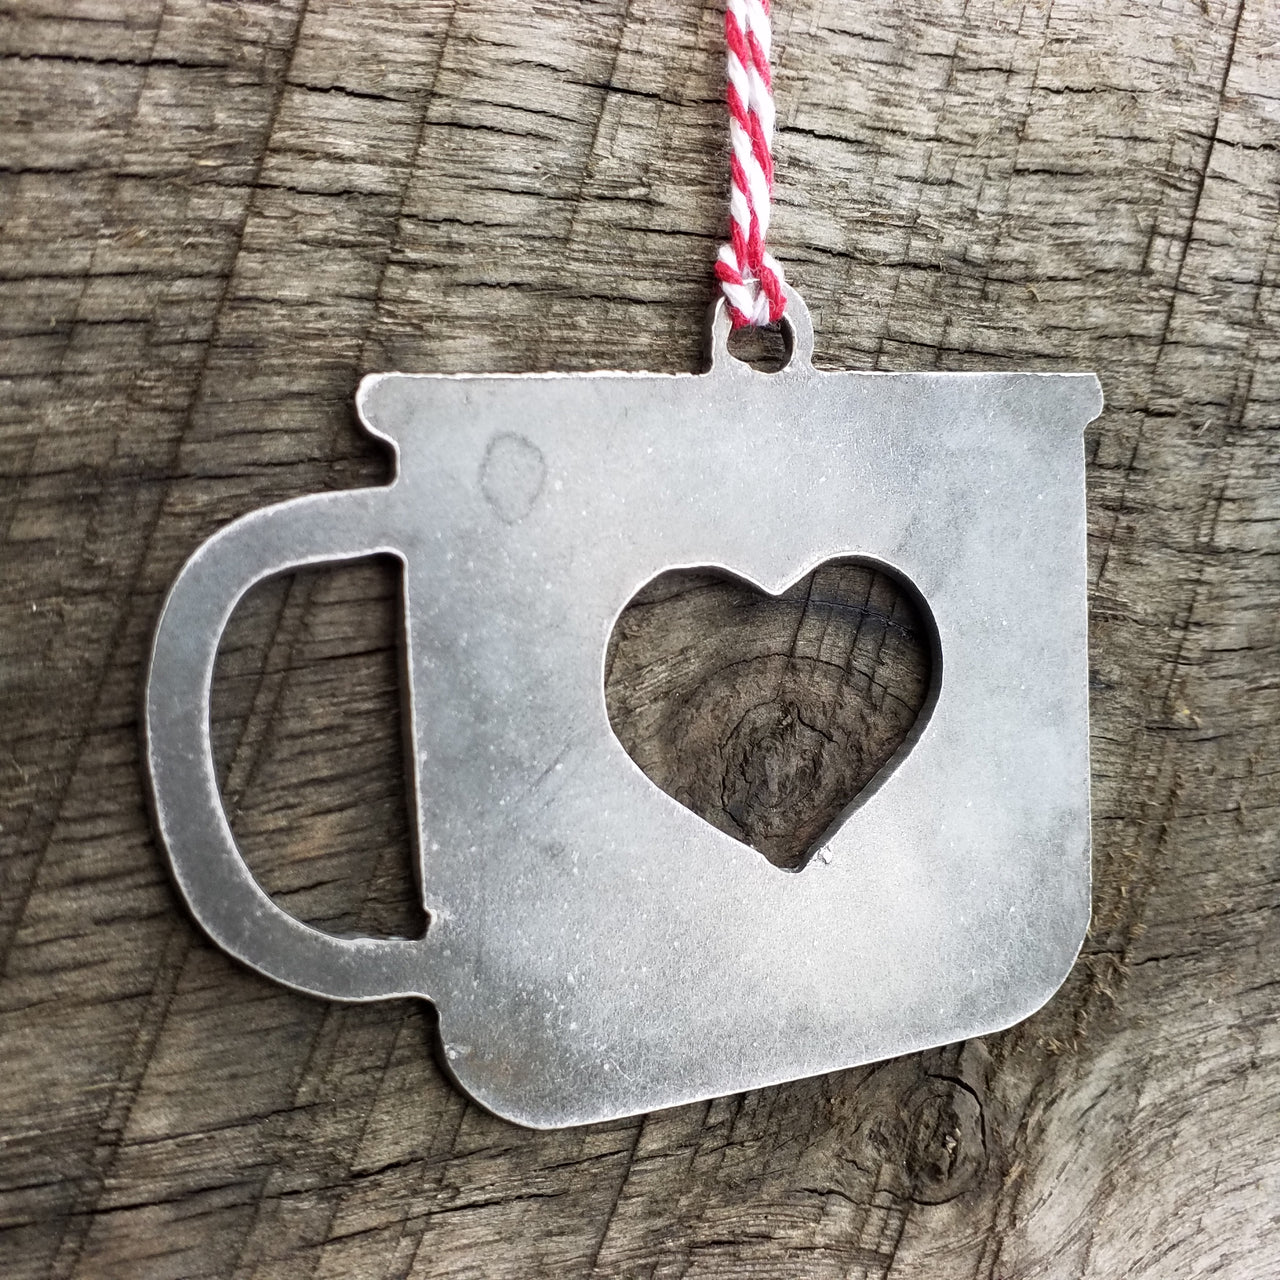 Camp Cup Heart Christmas Ornament - FREE SHIPPING, Stocking Stuffer, Holiday Gift, Tree, Coffee